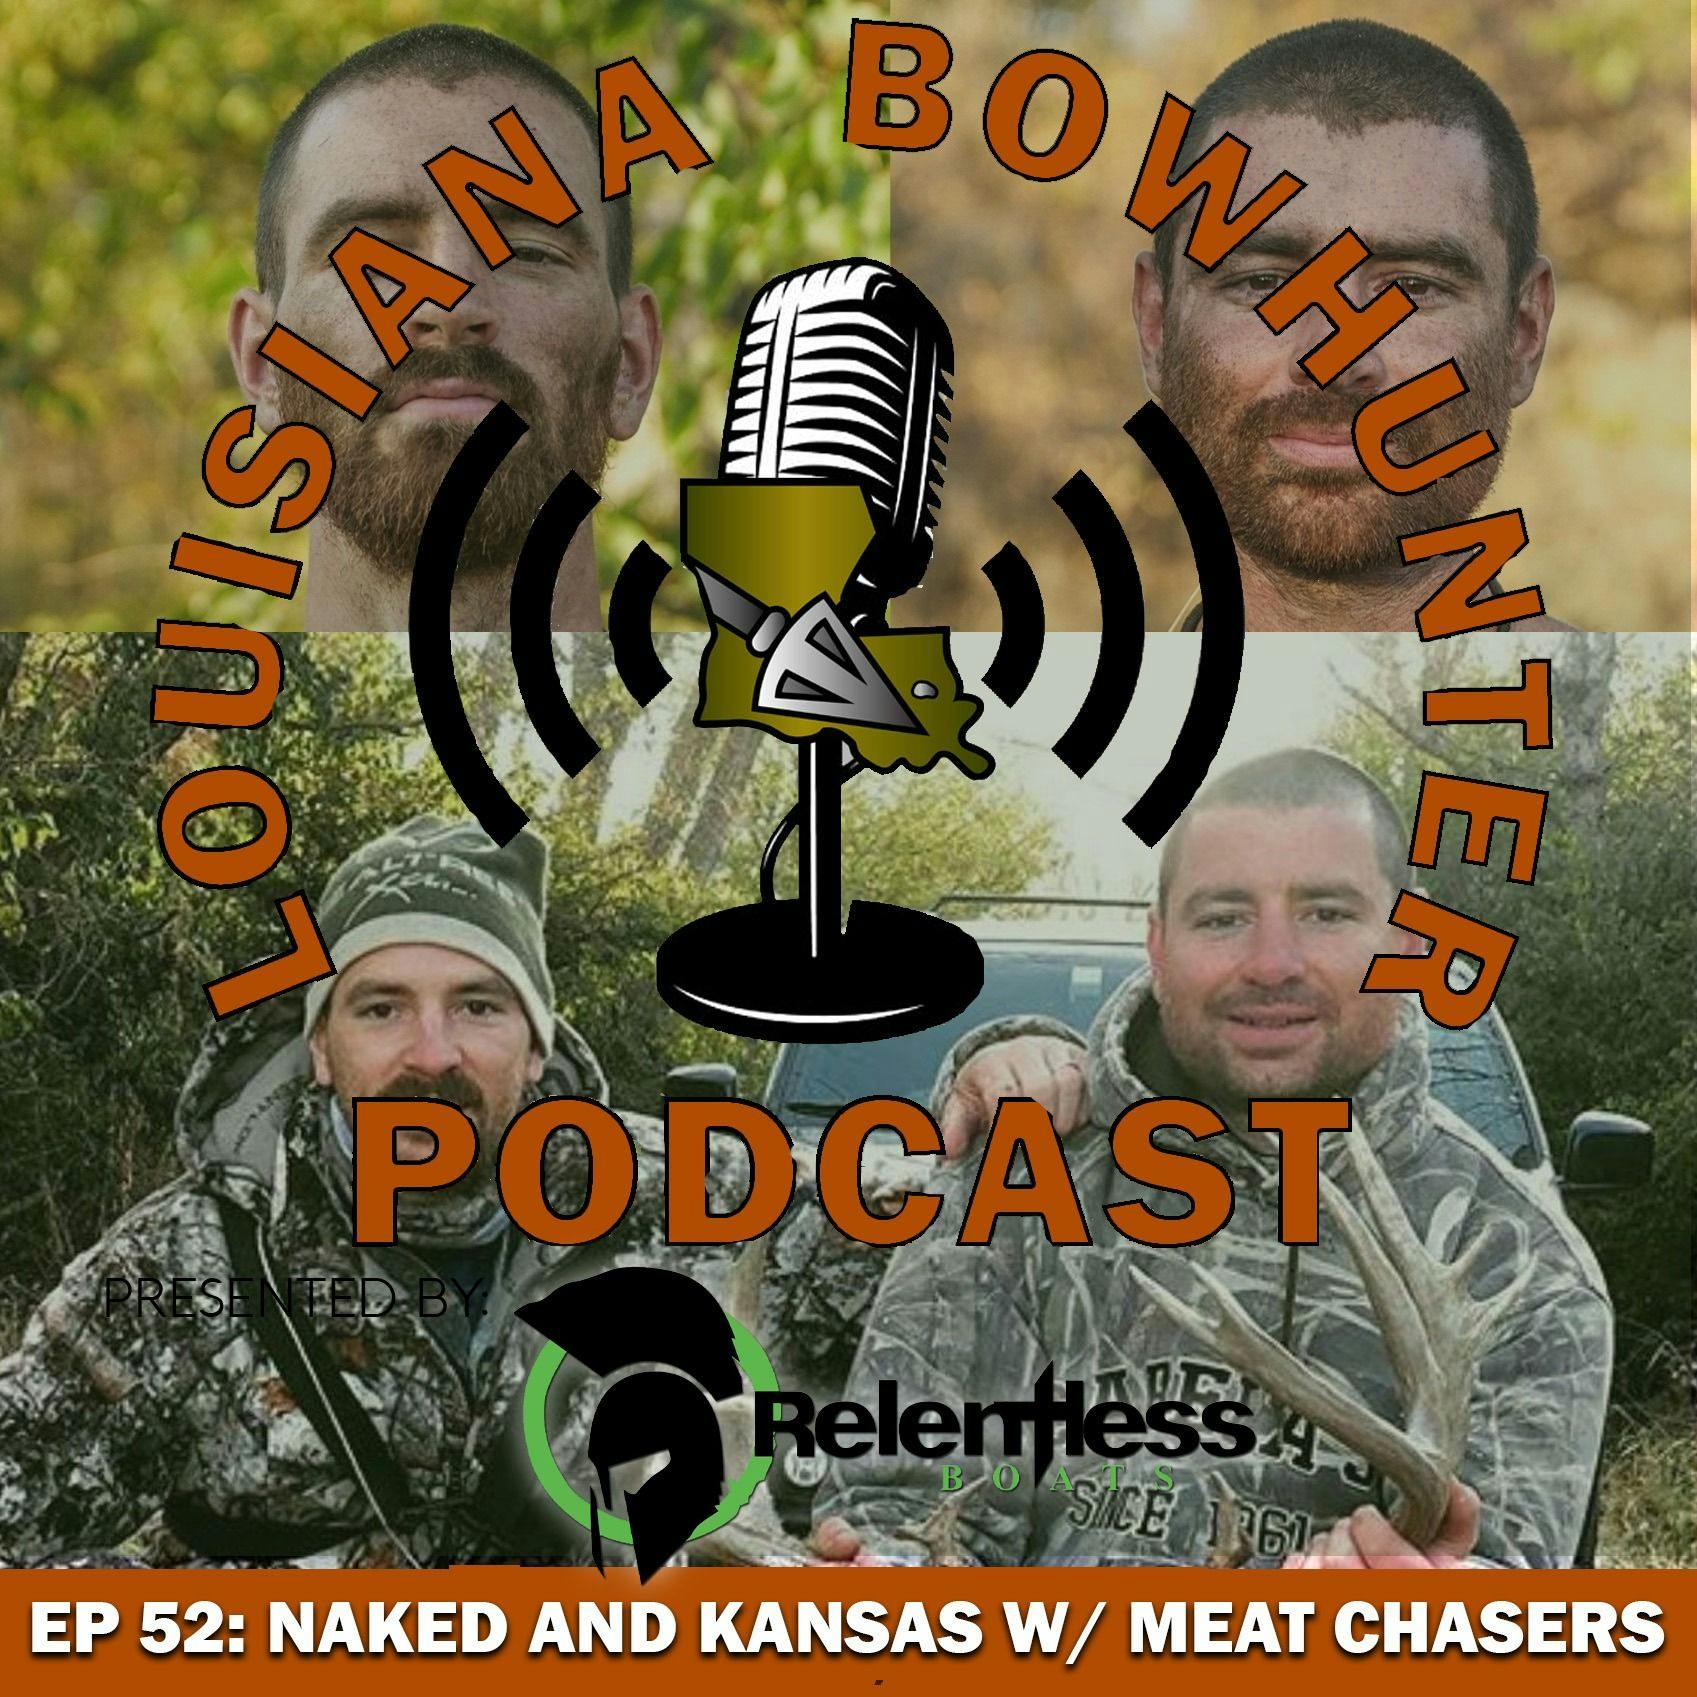 Episode 52: Naked and Kansas with Meat Chasers